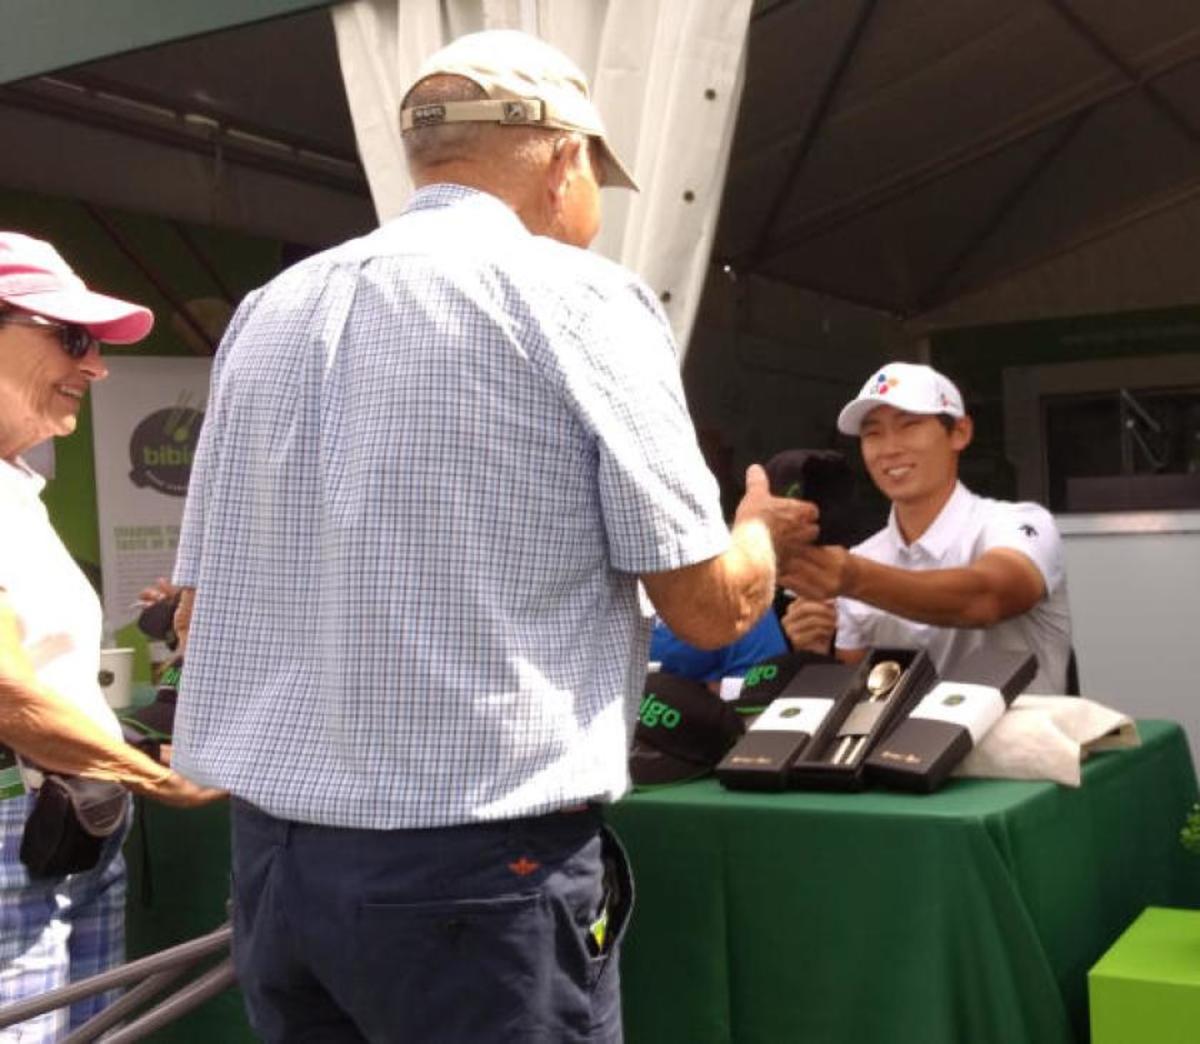 South Korea’s Whee Kim demonstrates how to win over American golf fans: with a smile and an autograph.